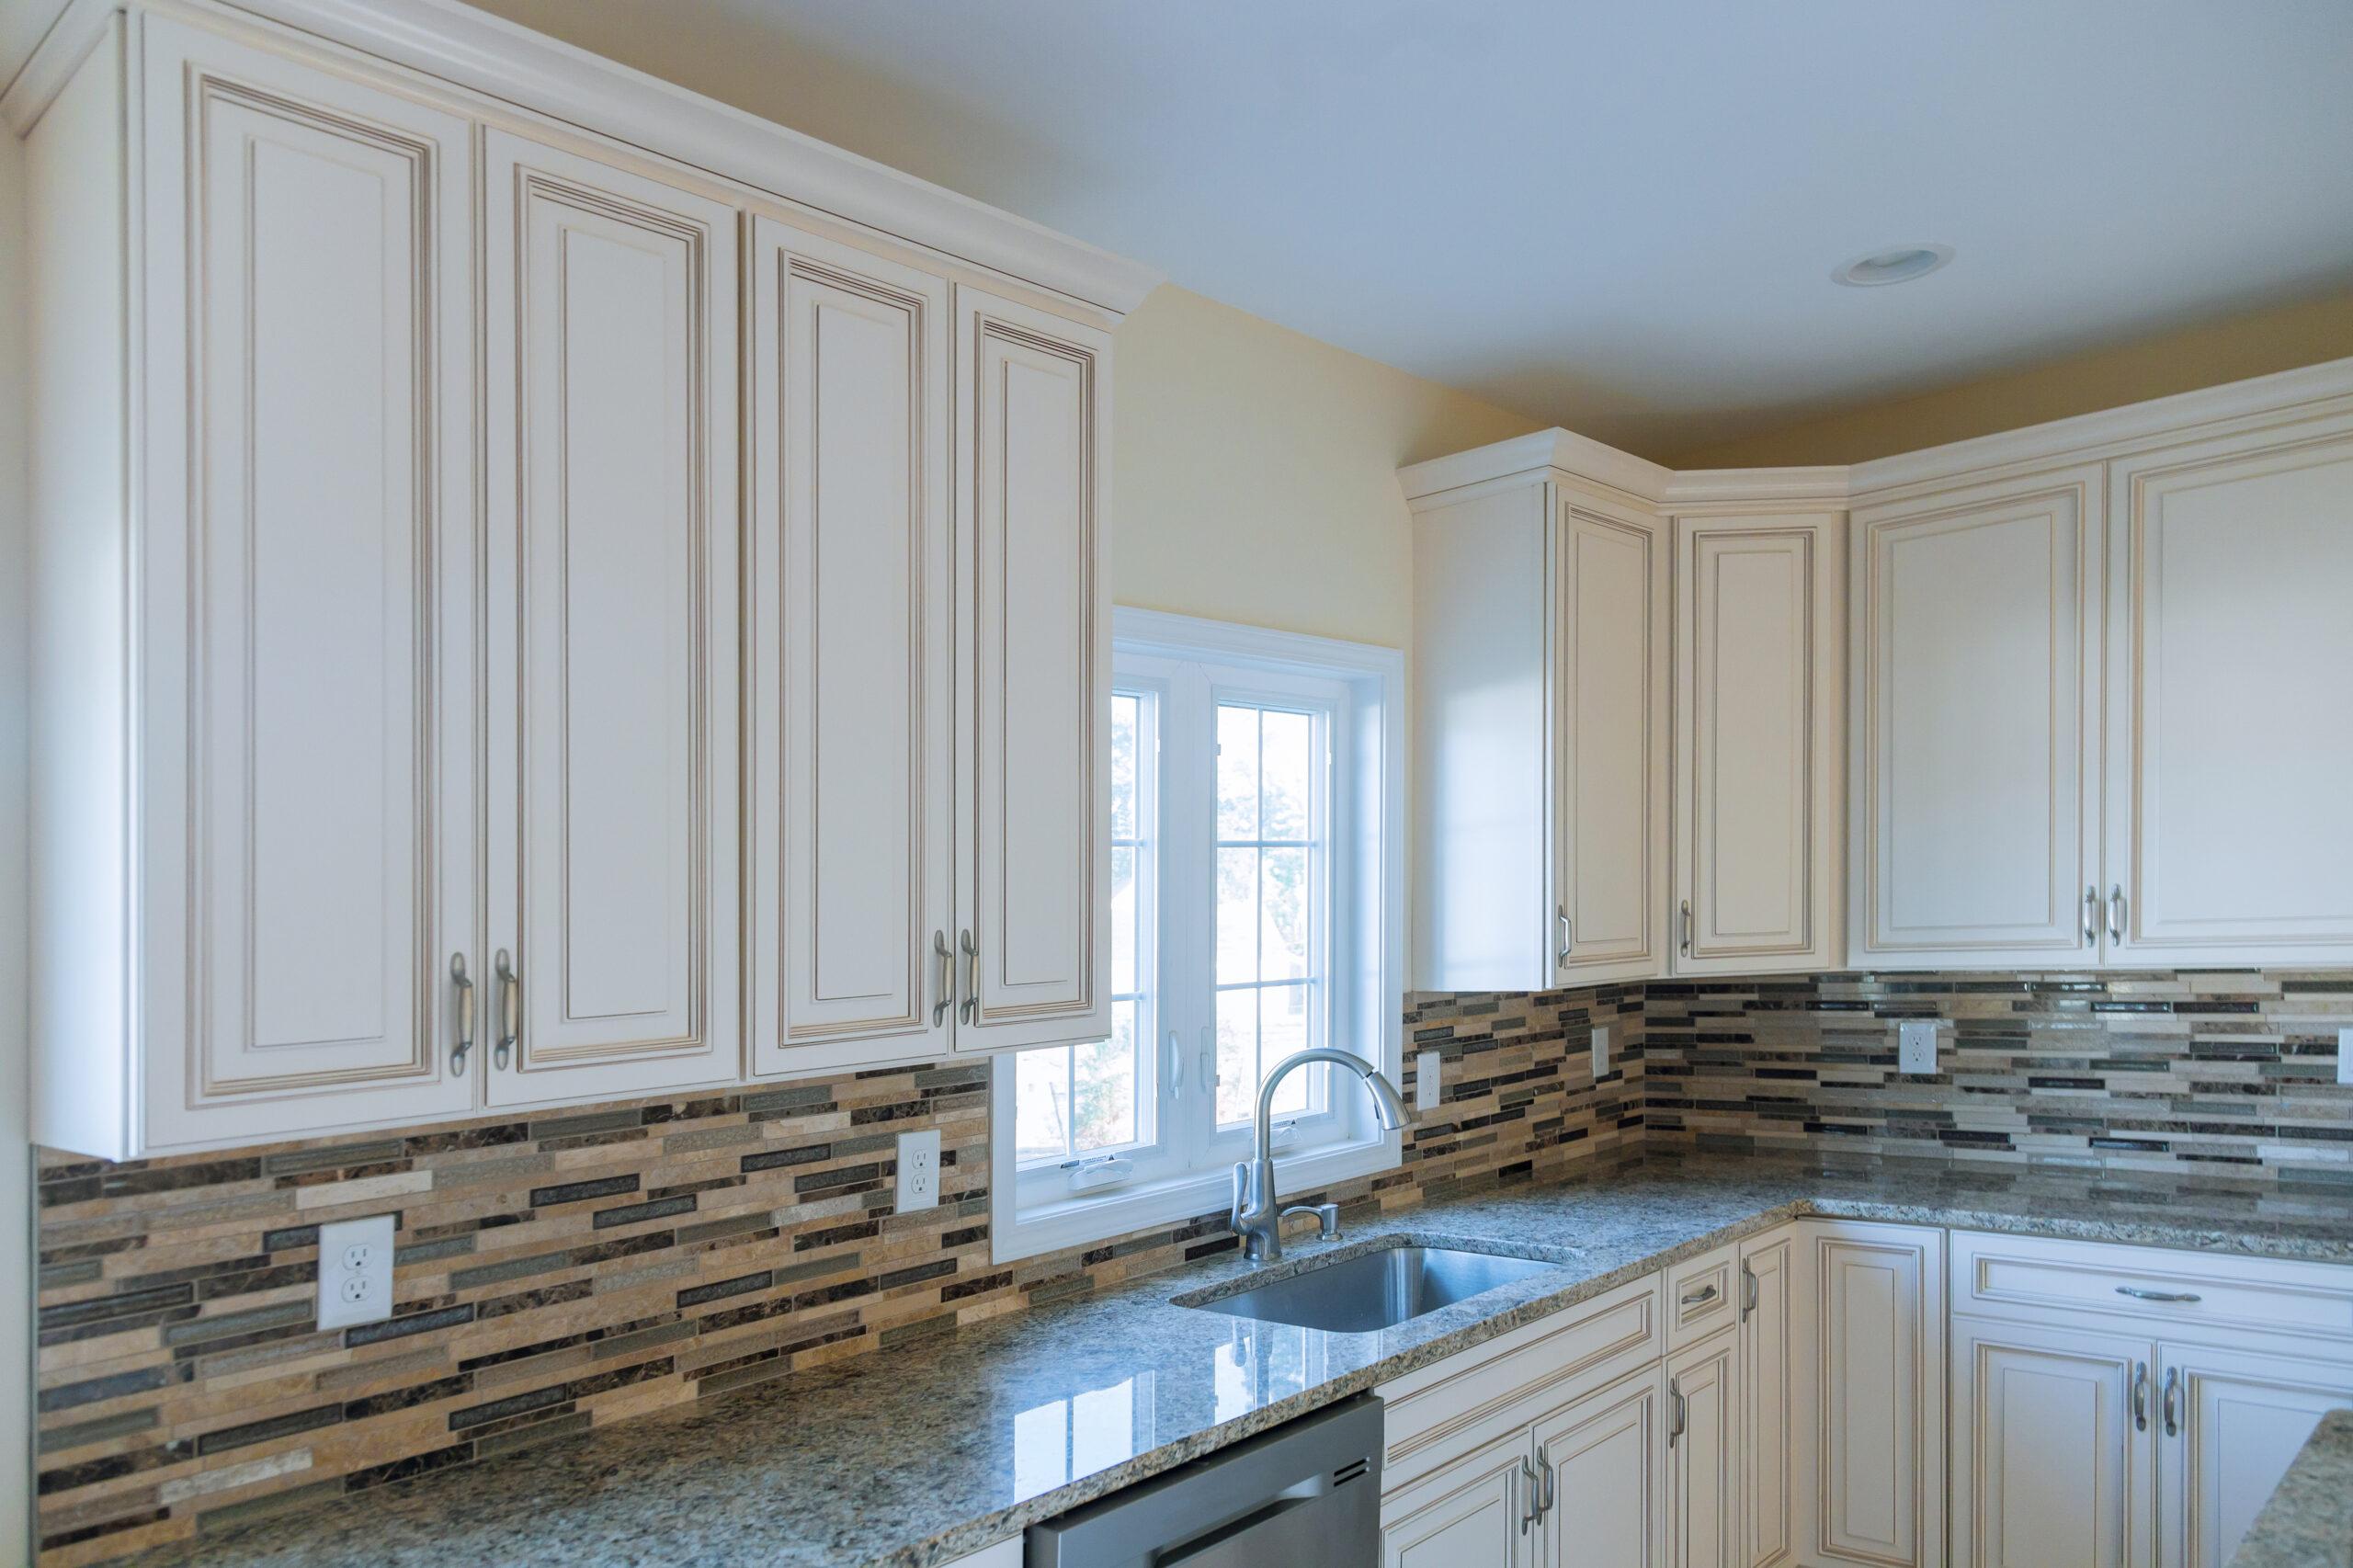 cabinetry kitchen remodeling tulsa remodel company best cabinet contractor